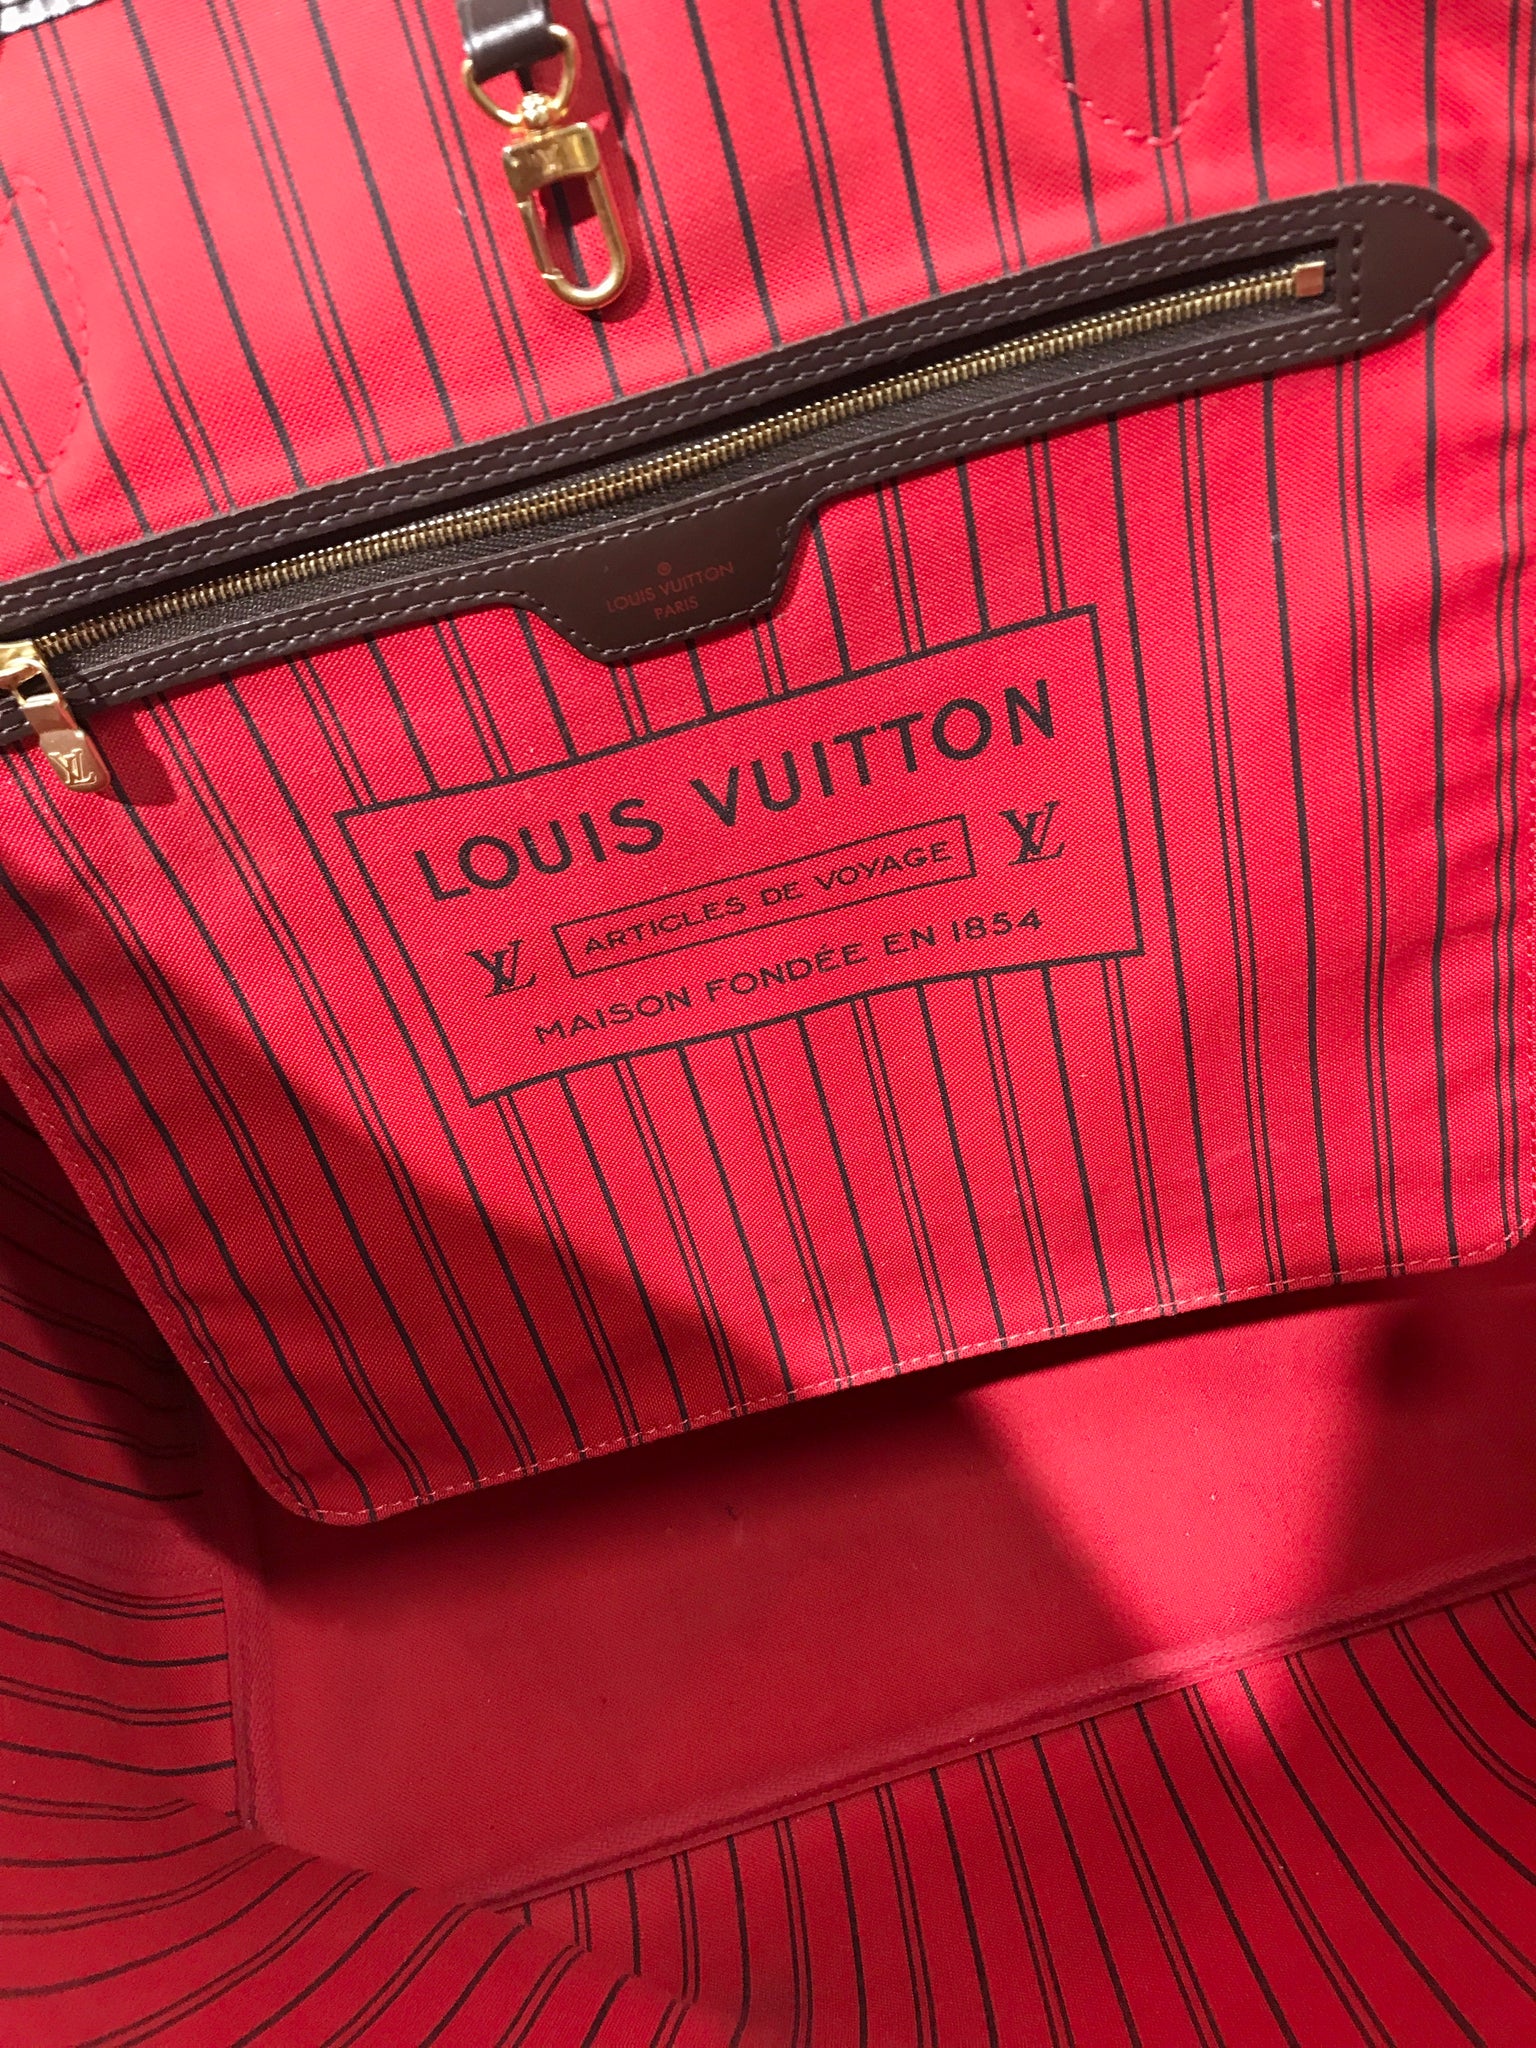 LOUIS VUITTON LOUIS VUITTON Neverfull GM Shoulder Tote Bag M40157 Monogram  Used LV M40157｜Product Code：2123100002175｜BRAND OFF Online Store